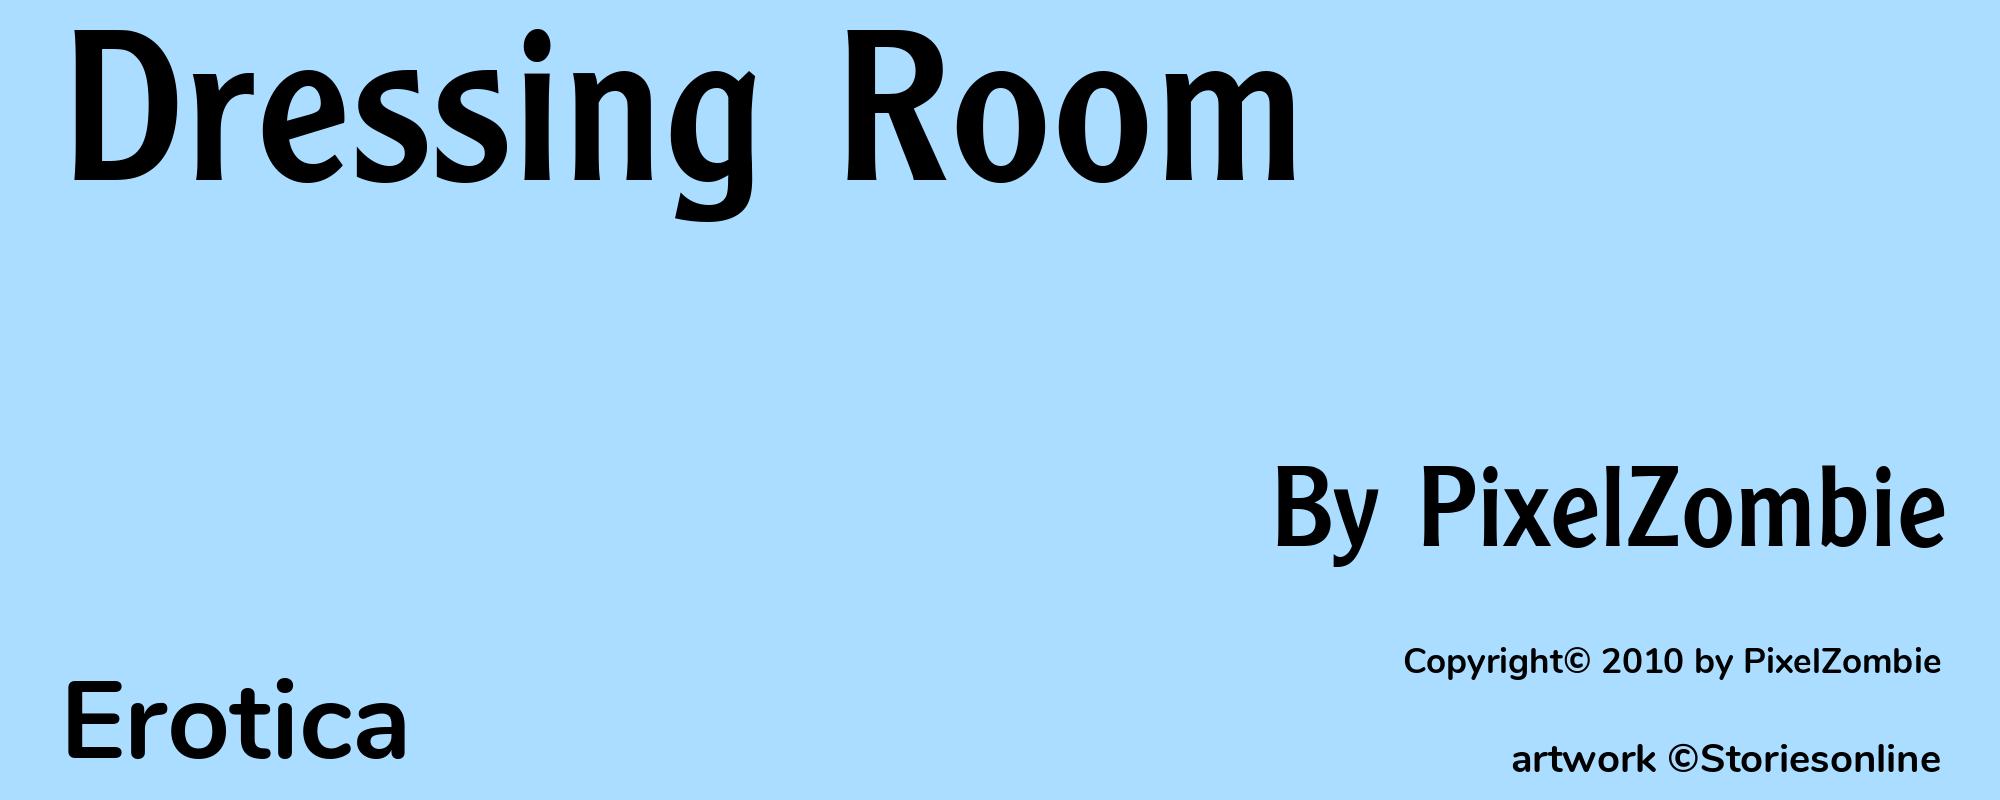 Dressing Room - Cover